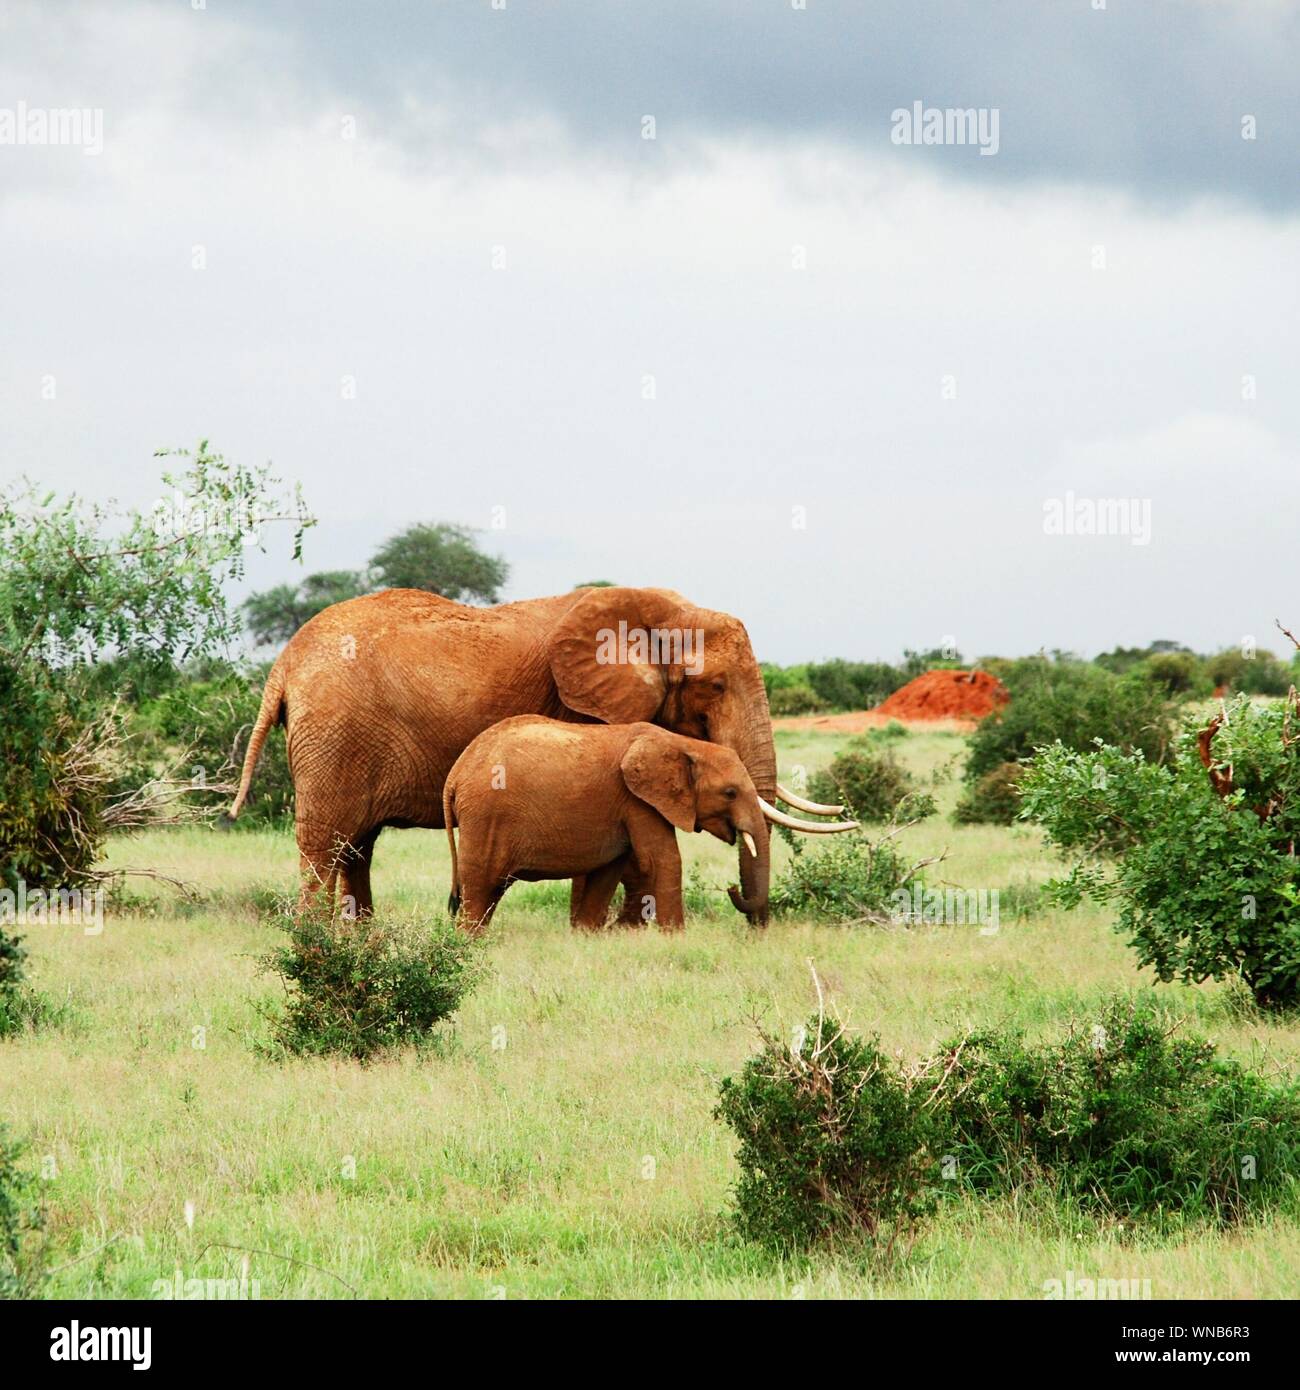 Female Animal With Calf Standing In Field Stock Photo